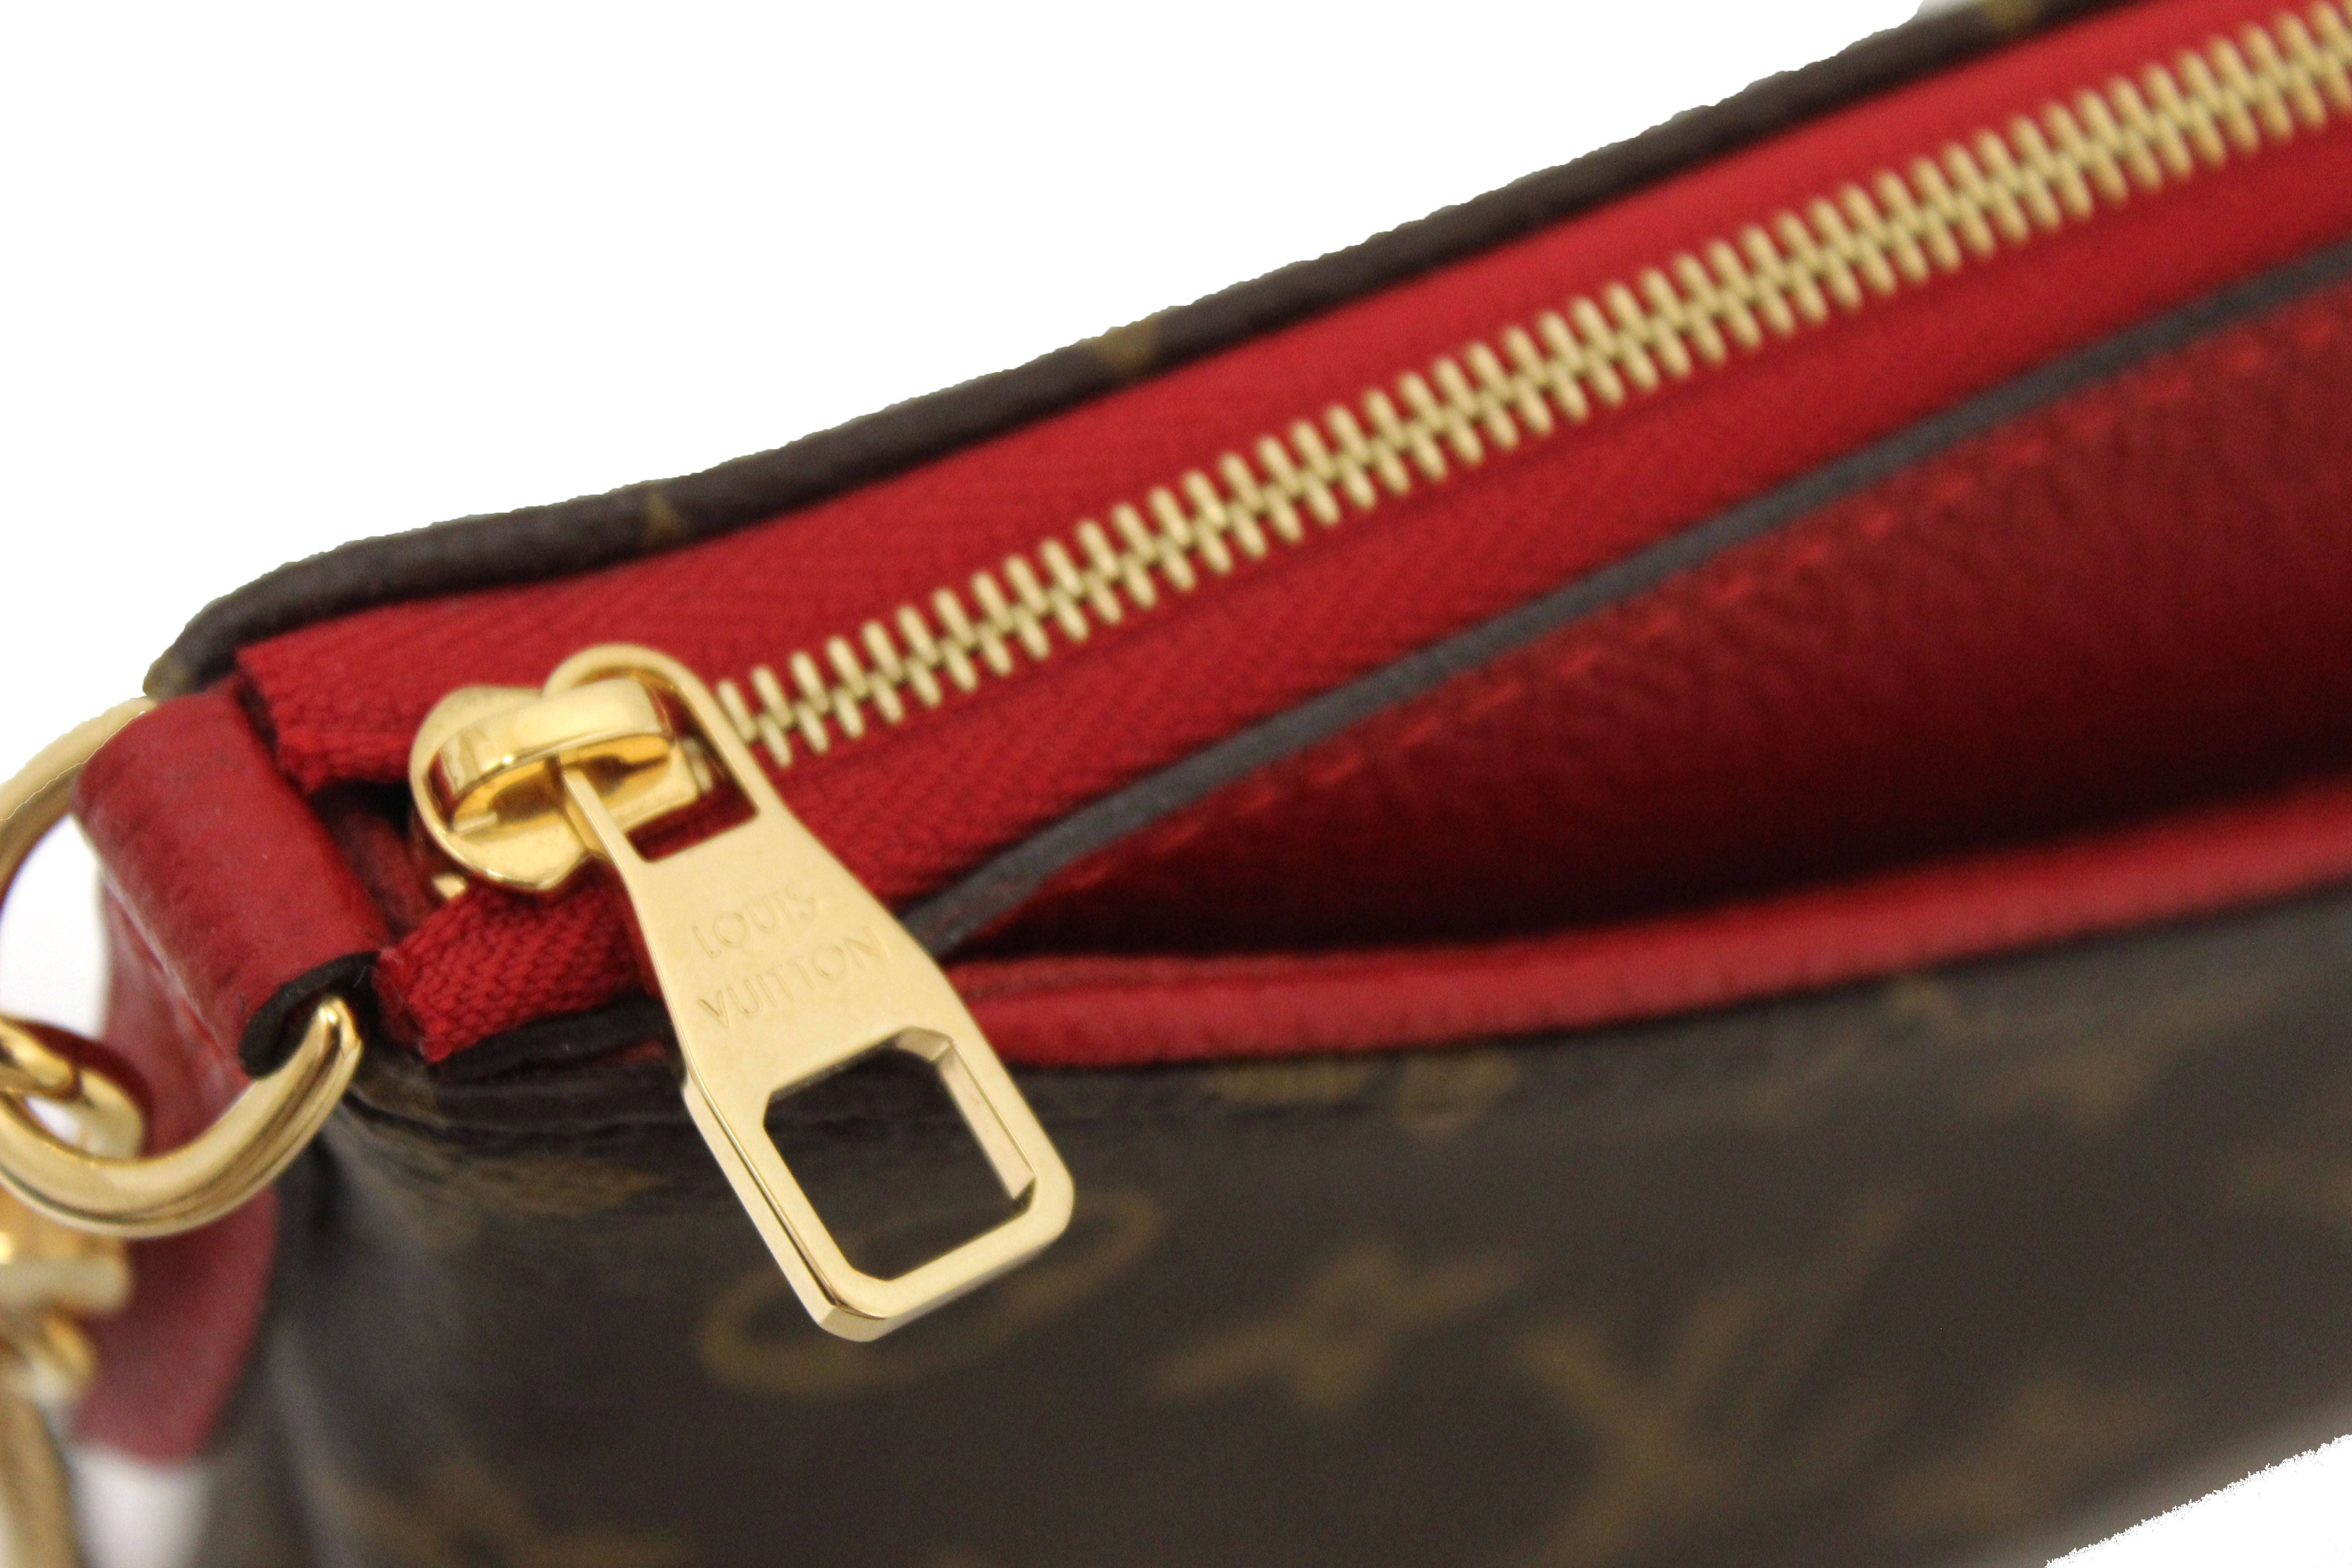 Louis Vuitton pre-owned Atoll clutch bag - ShopStyle